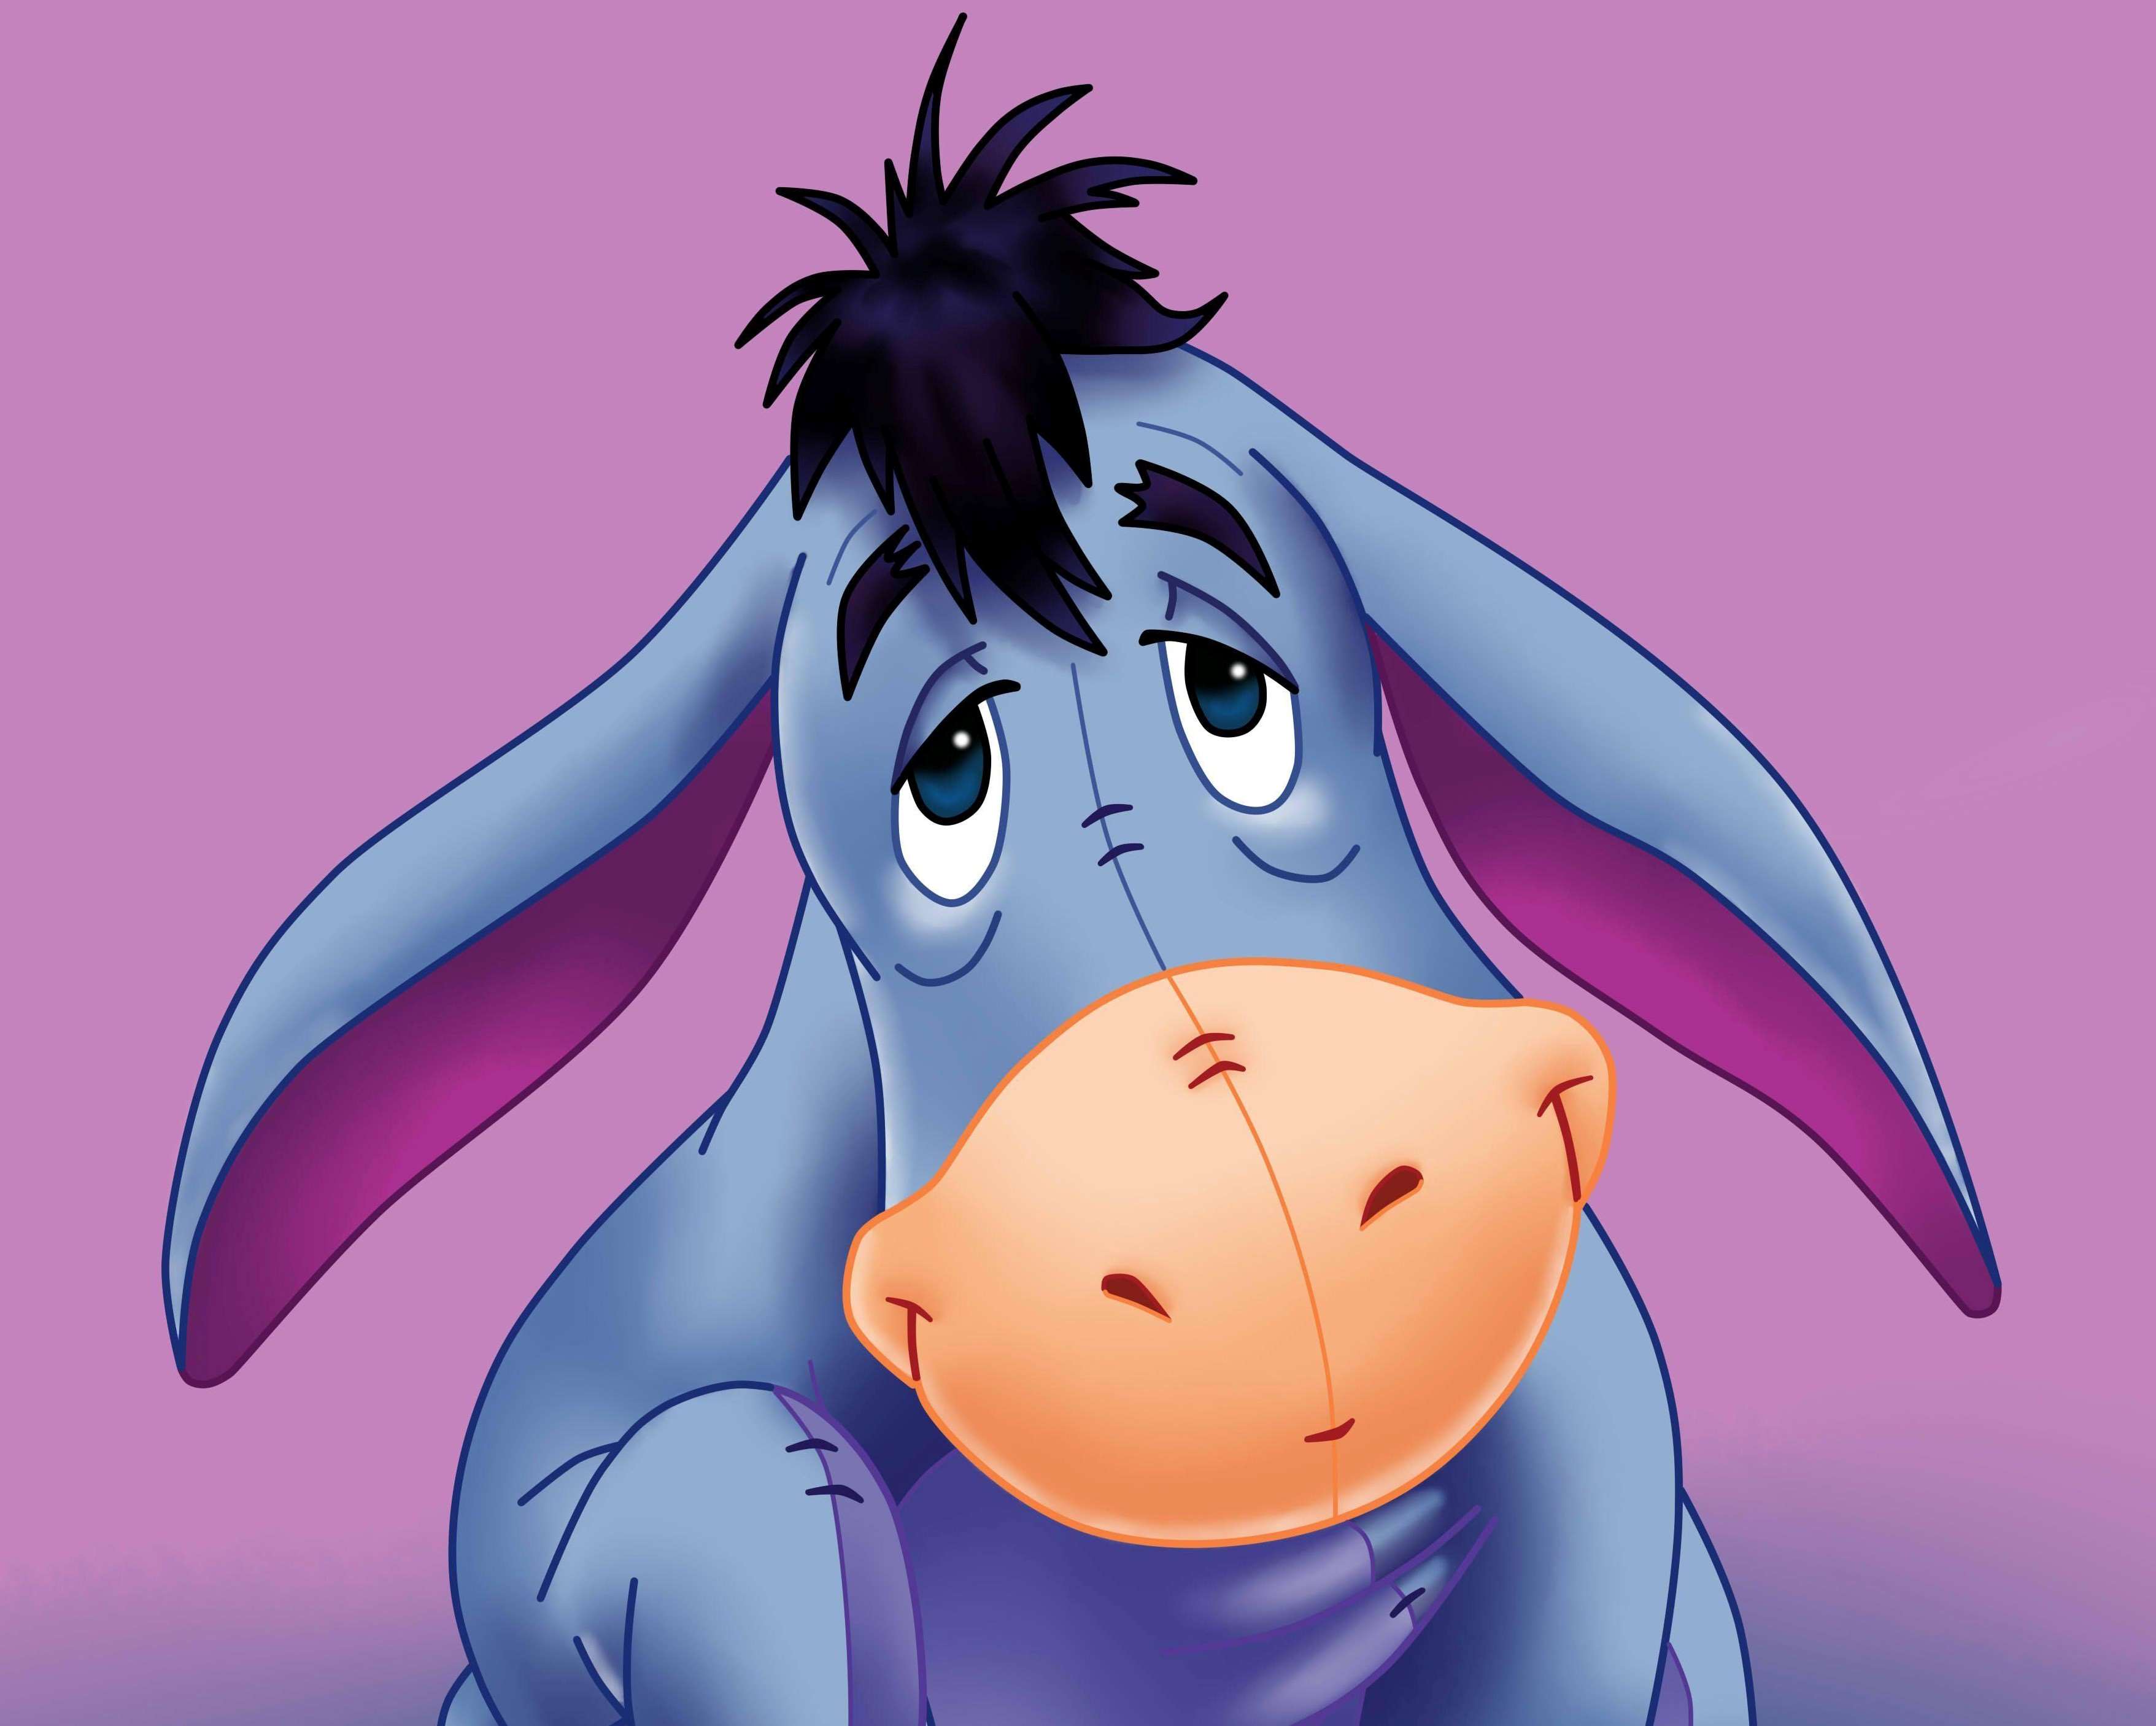 19 Facts About Eeyore (Winnie The Pooh) 